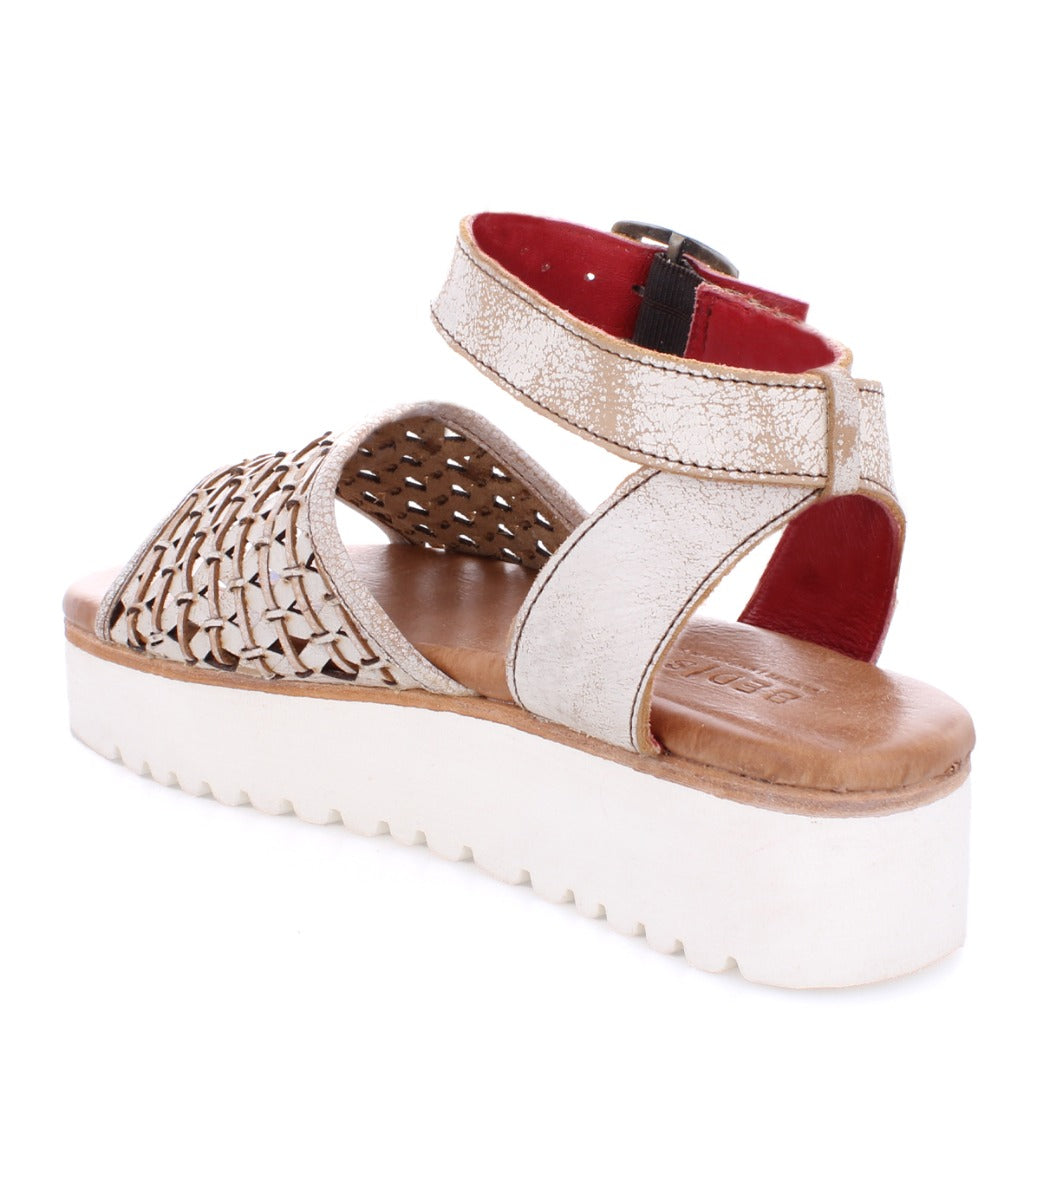 A women's sandal with braided straps and a white sole, the Brisa by Bed Stu.